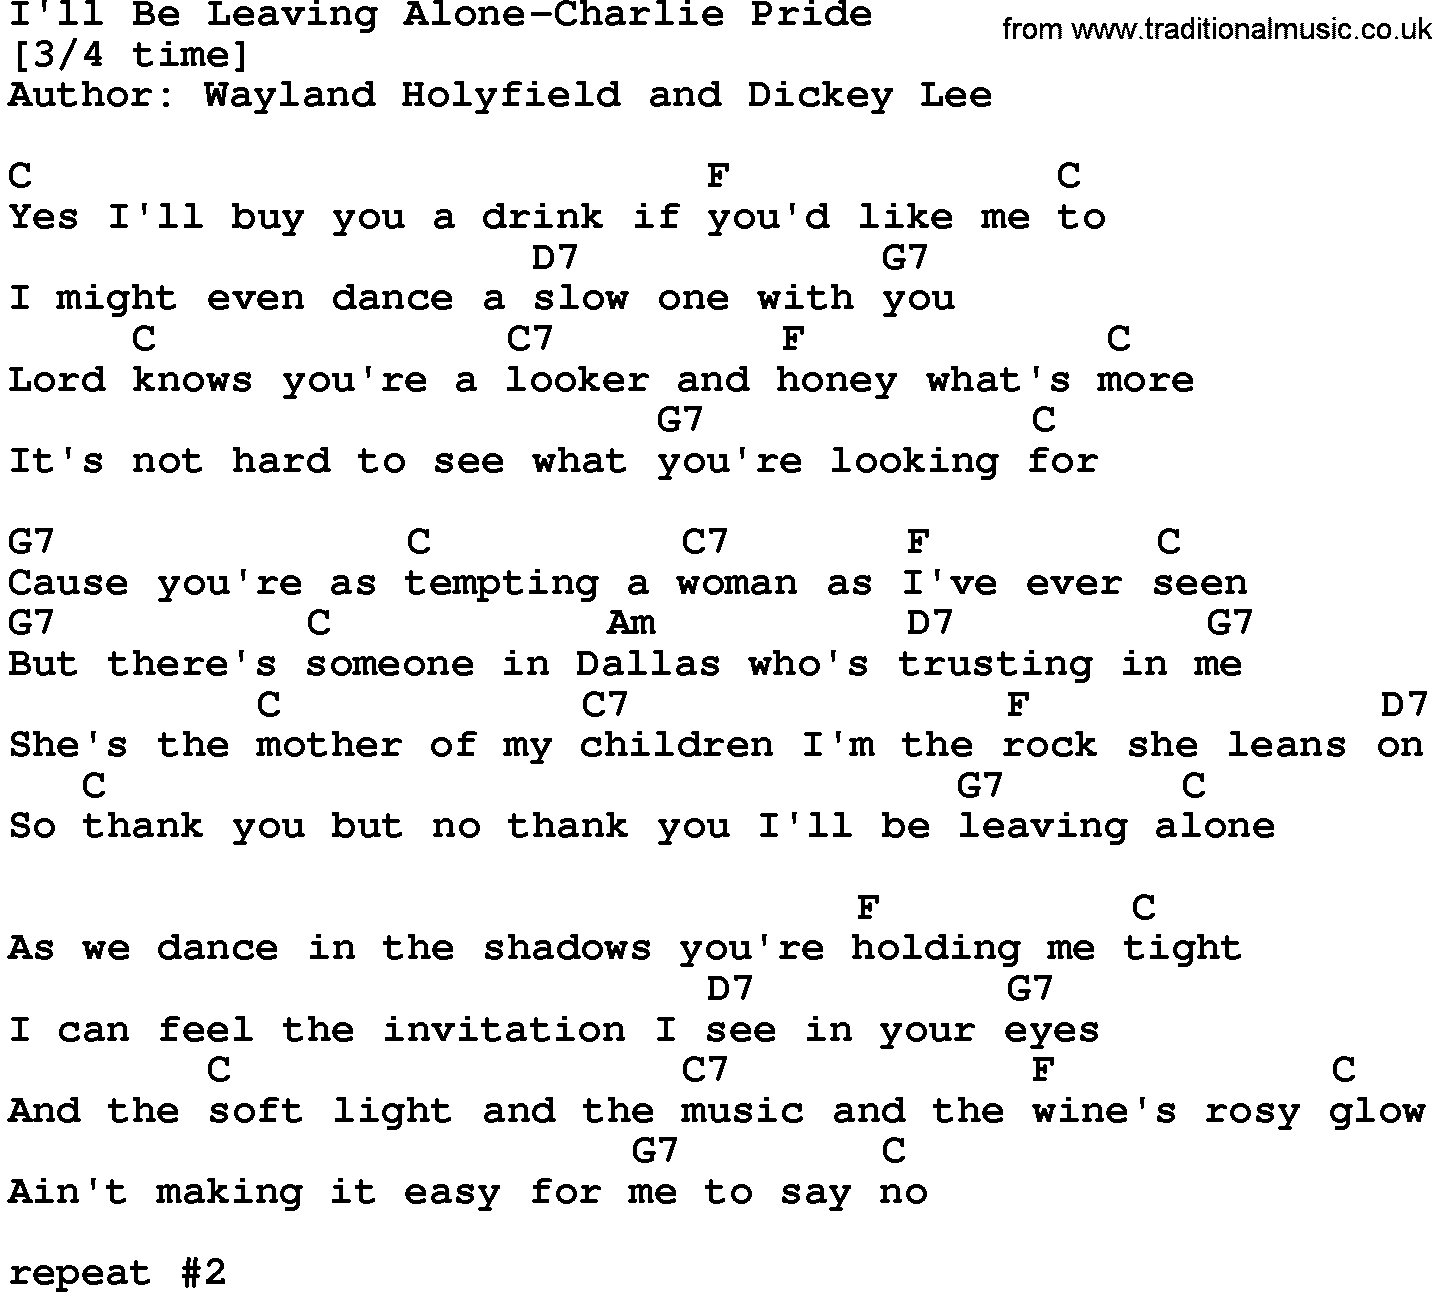 Country music song: I'll Be Leaving Alone-Charlie Pride lyrics and chords